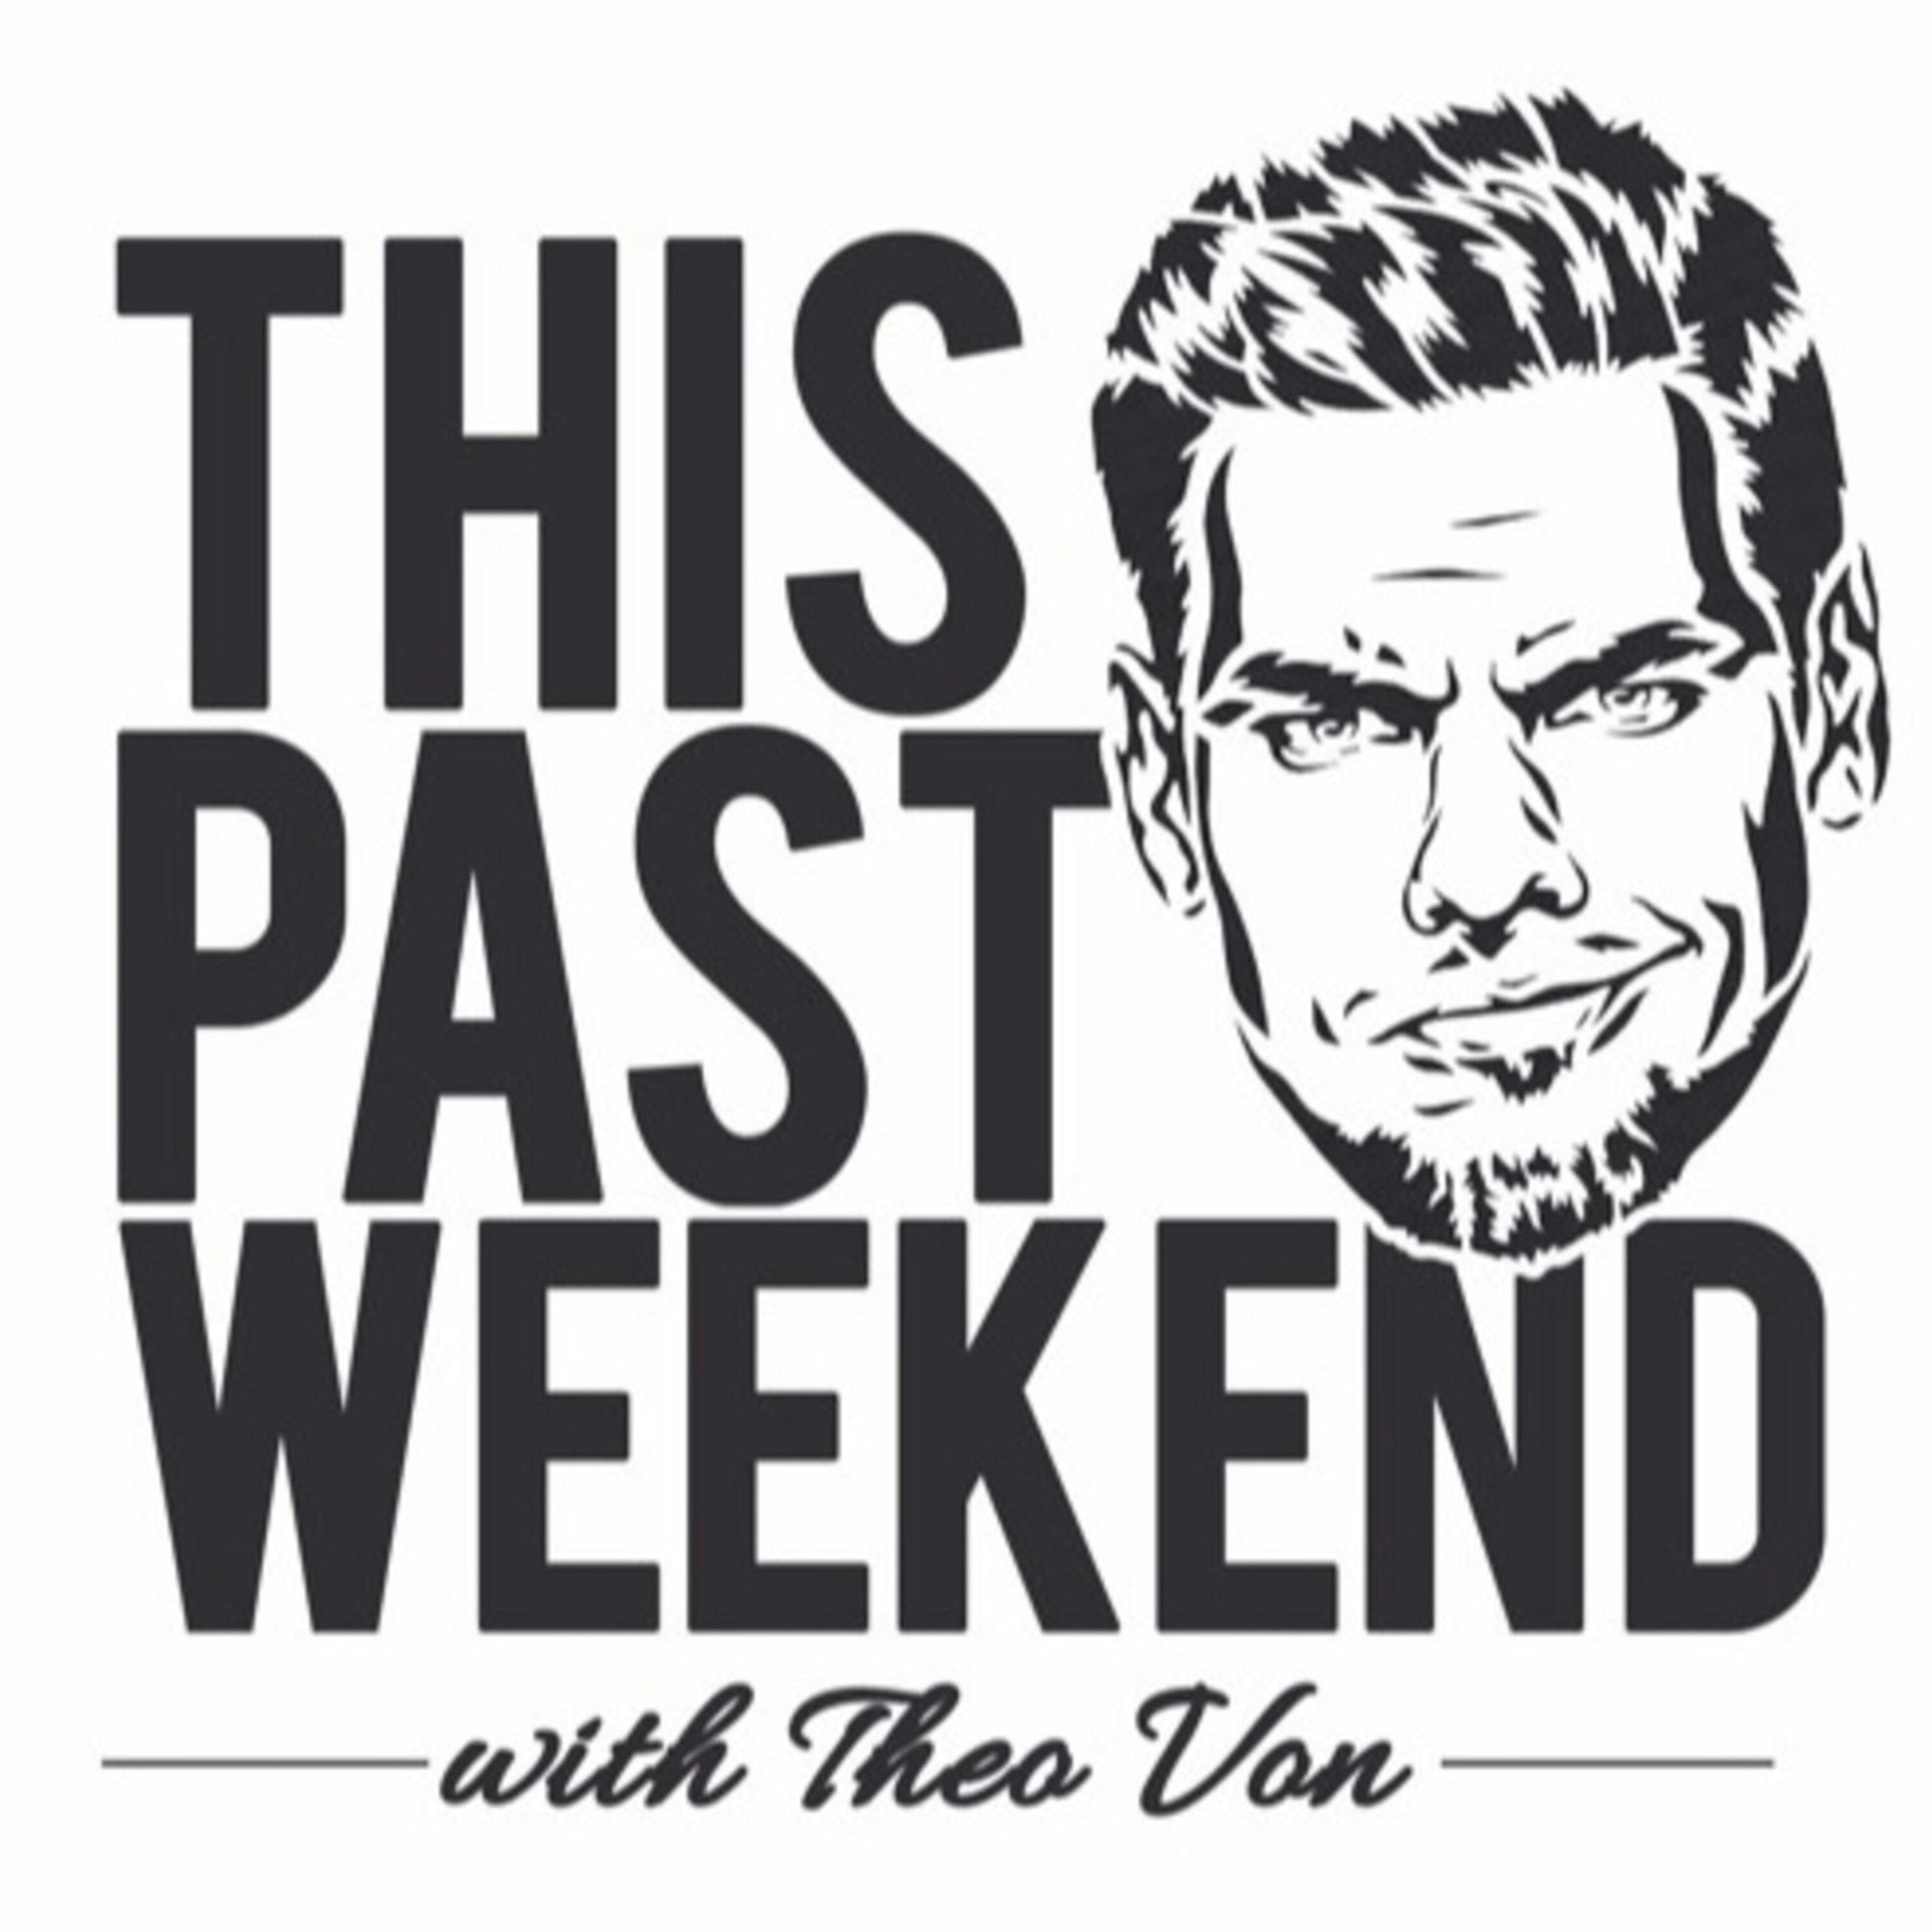 10-23-17 | This Past Weekend #47 by Theo Von